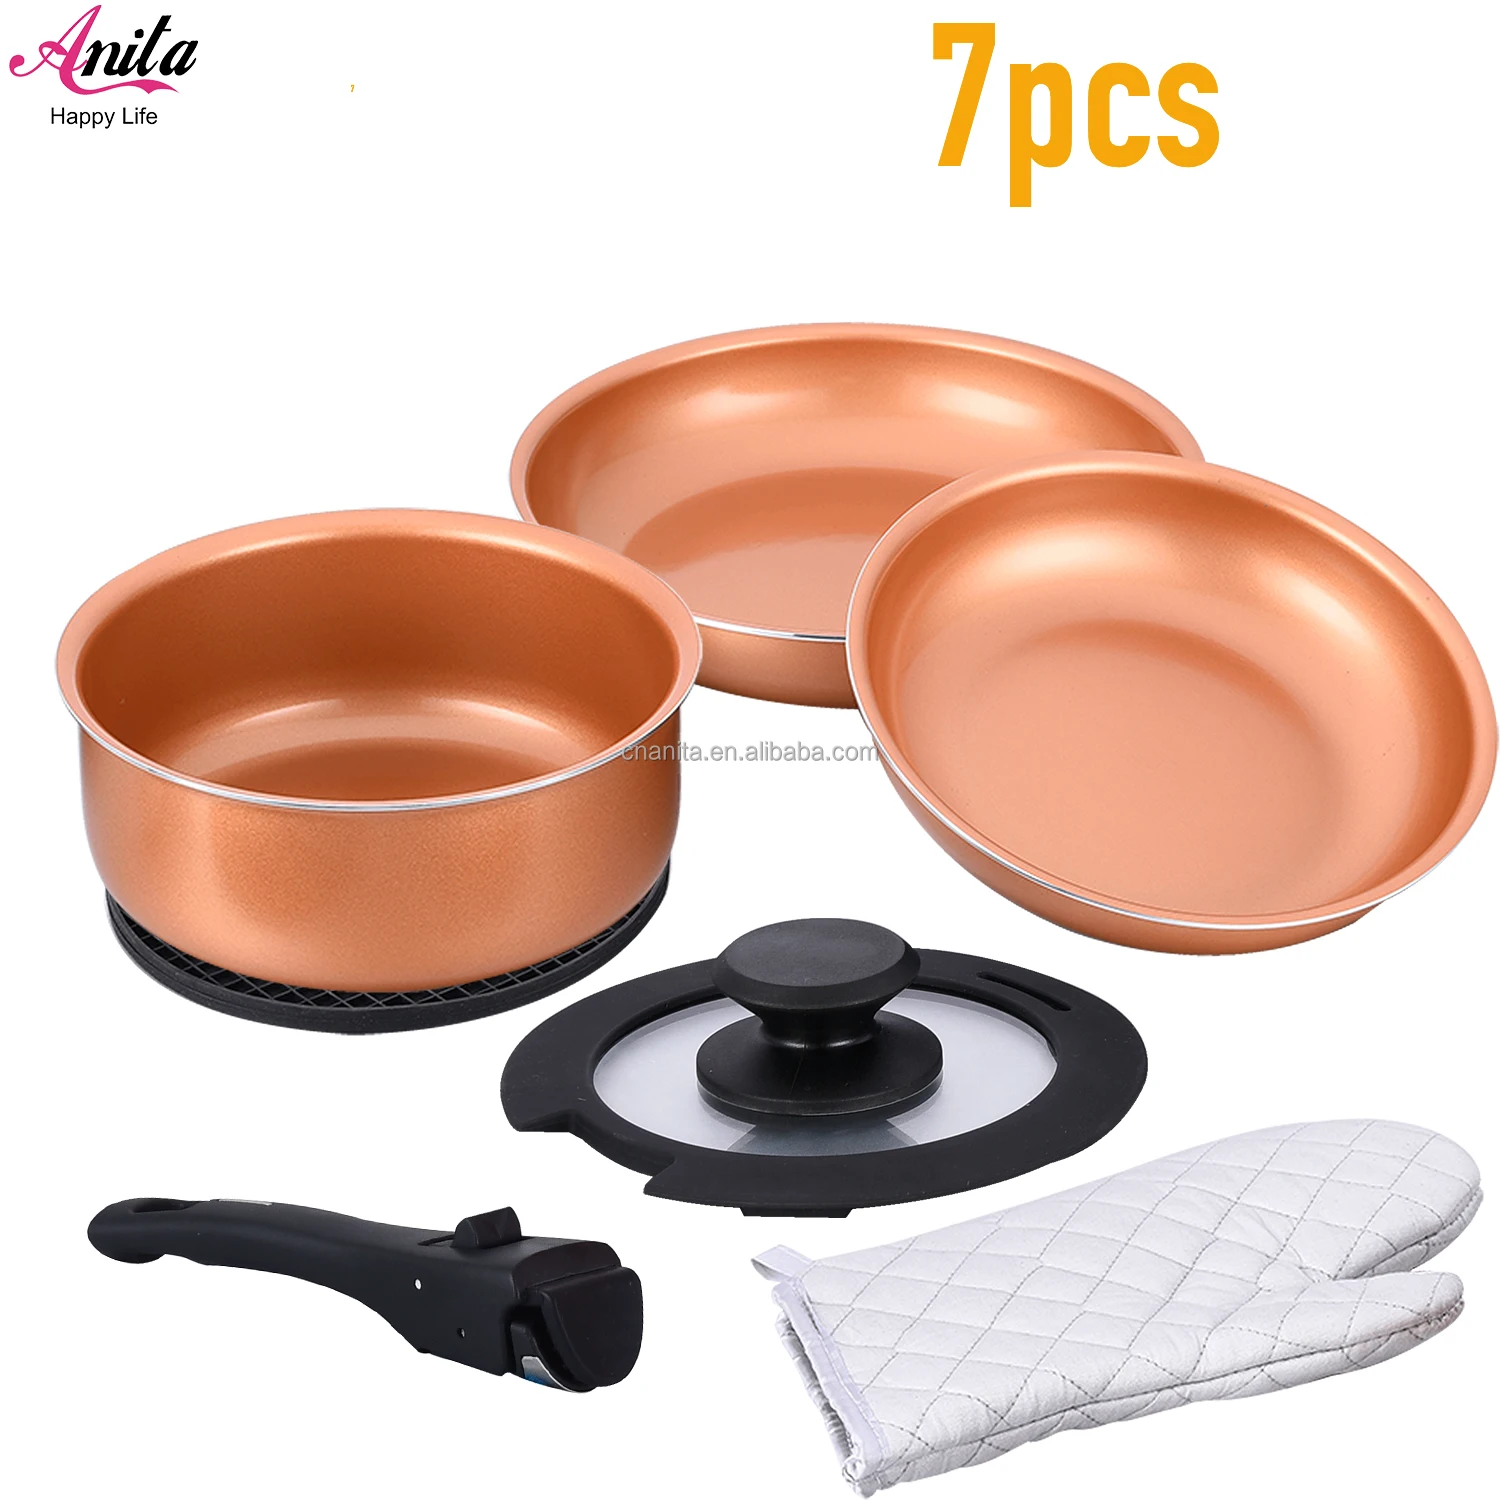 Wholesale High Quality Nonstick Cookware Set with Detachable Handle Pots  and Pans Set-7pcs From m.